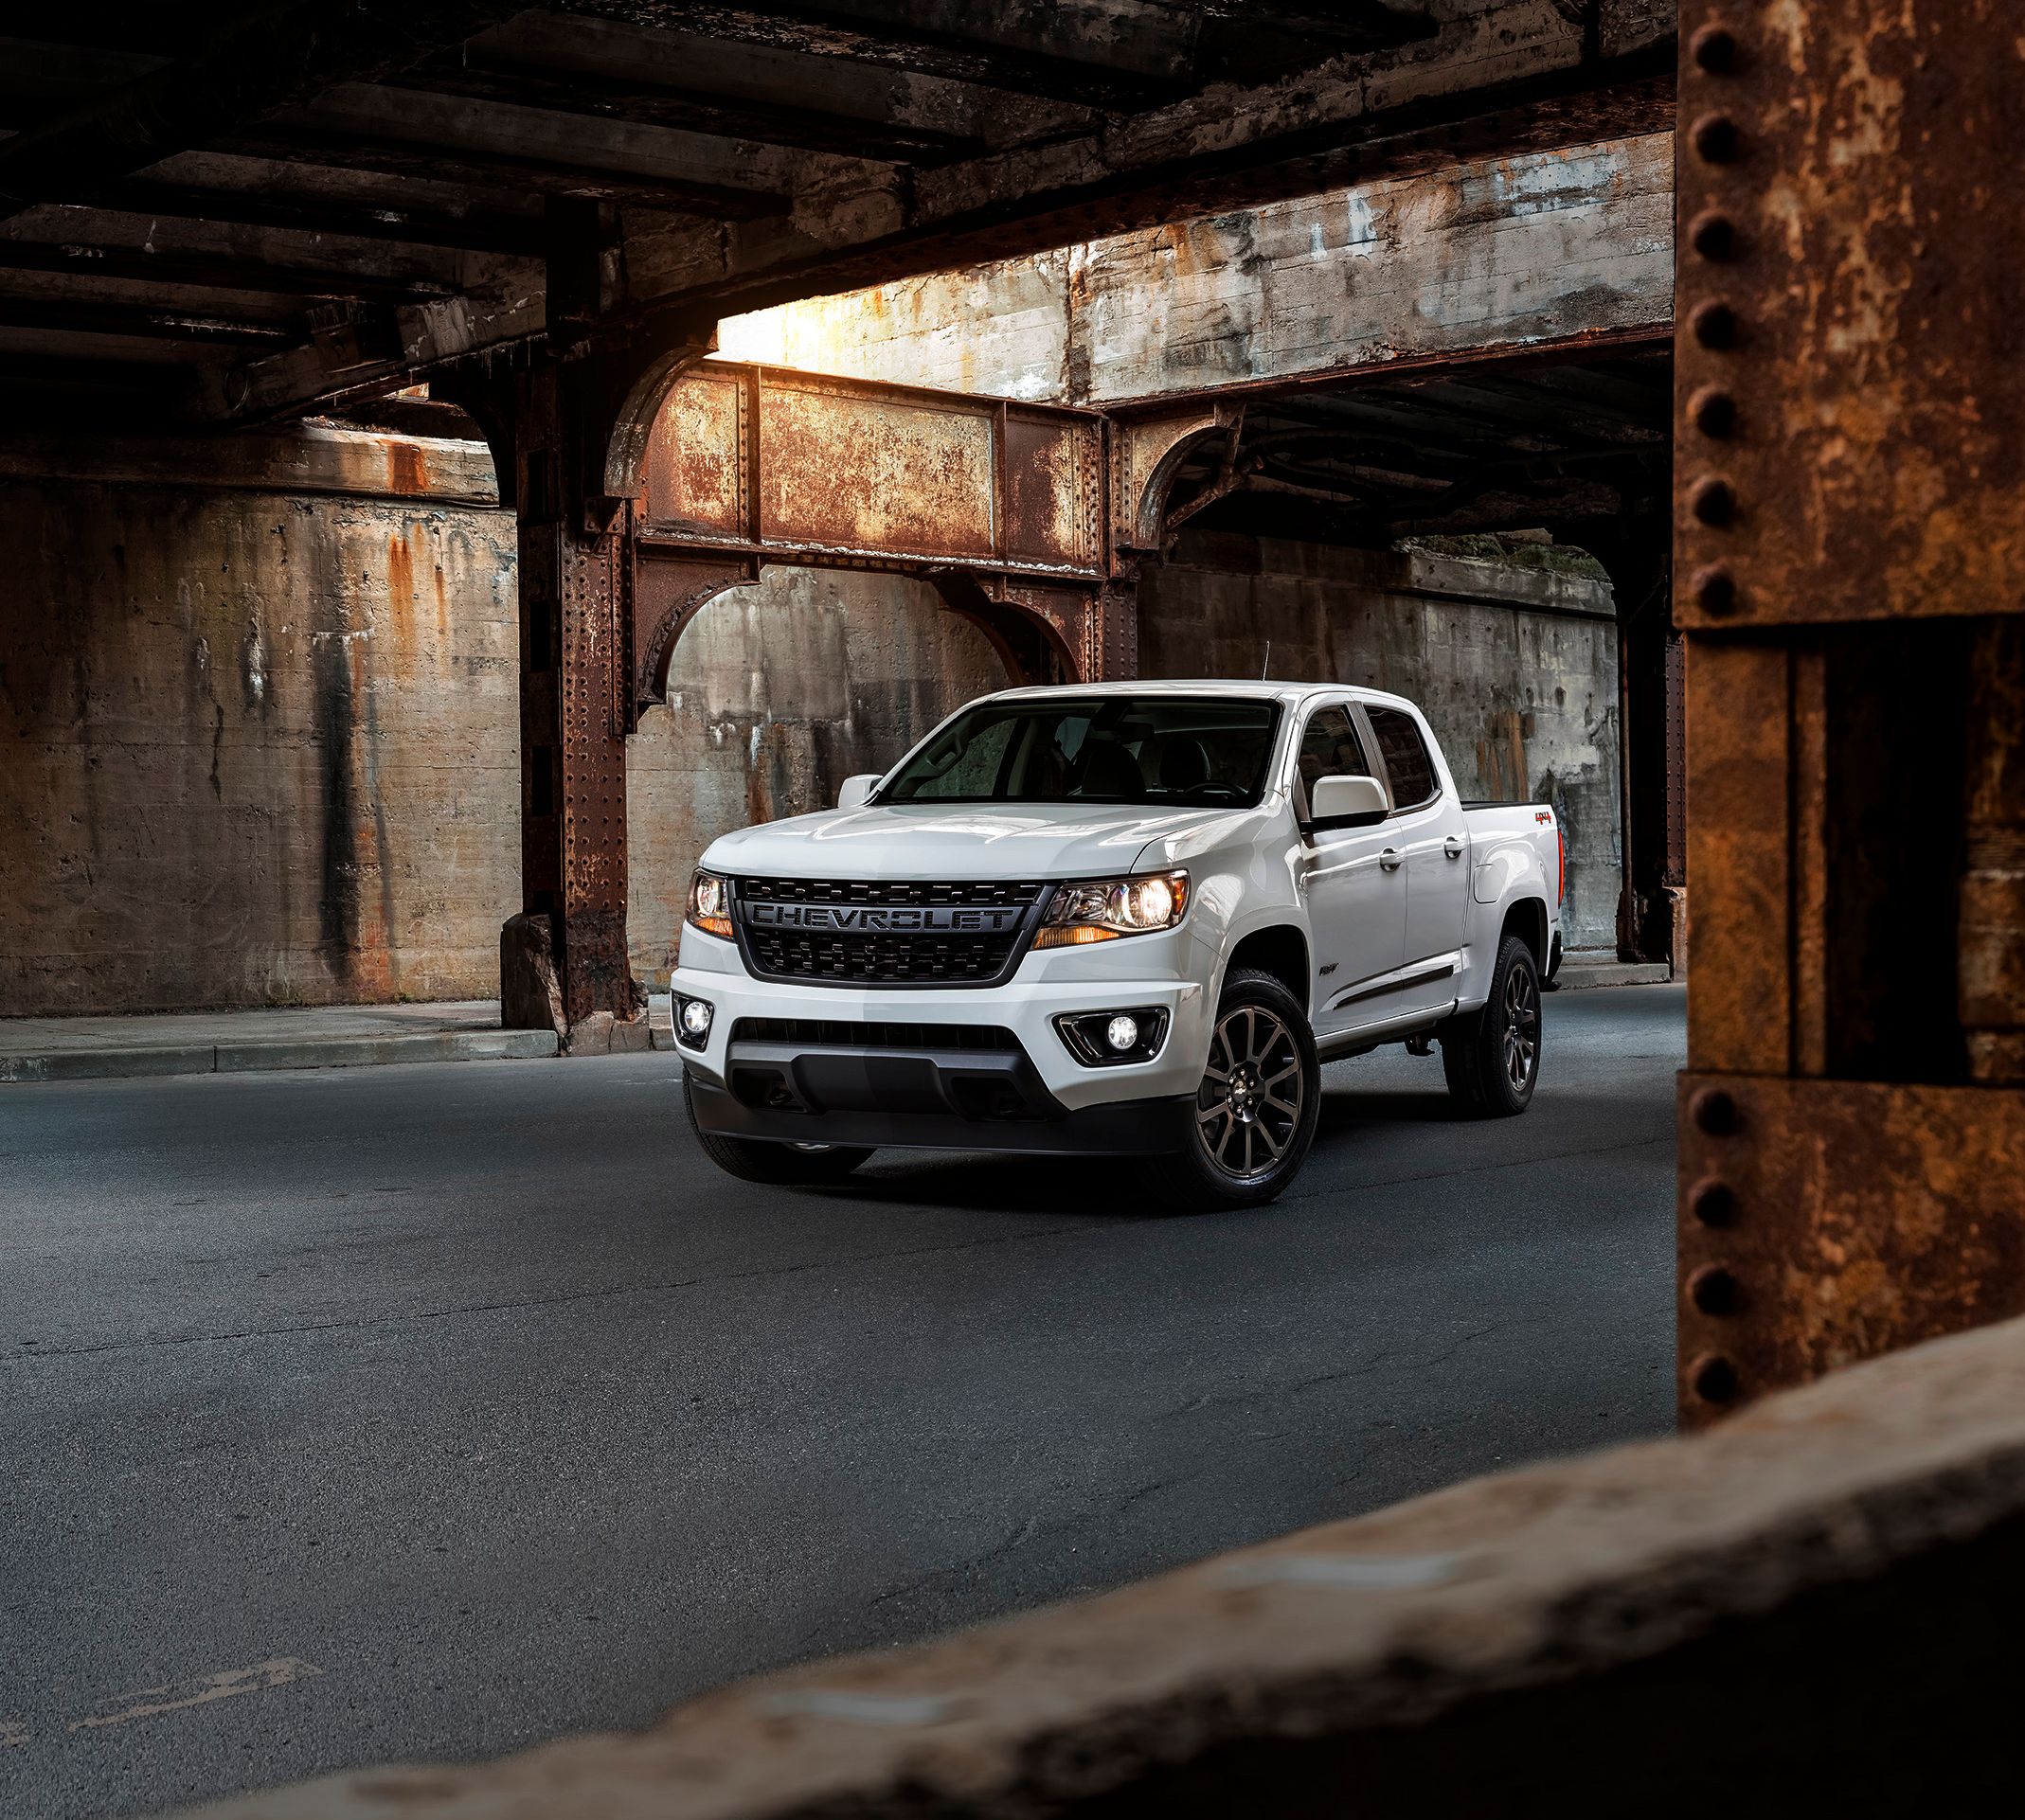 2019 Chevy Unveils Pair of Special Edition Colorados for the Dirt and the Street